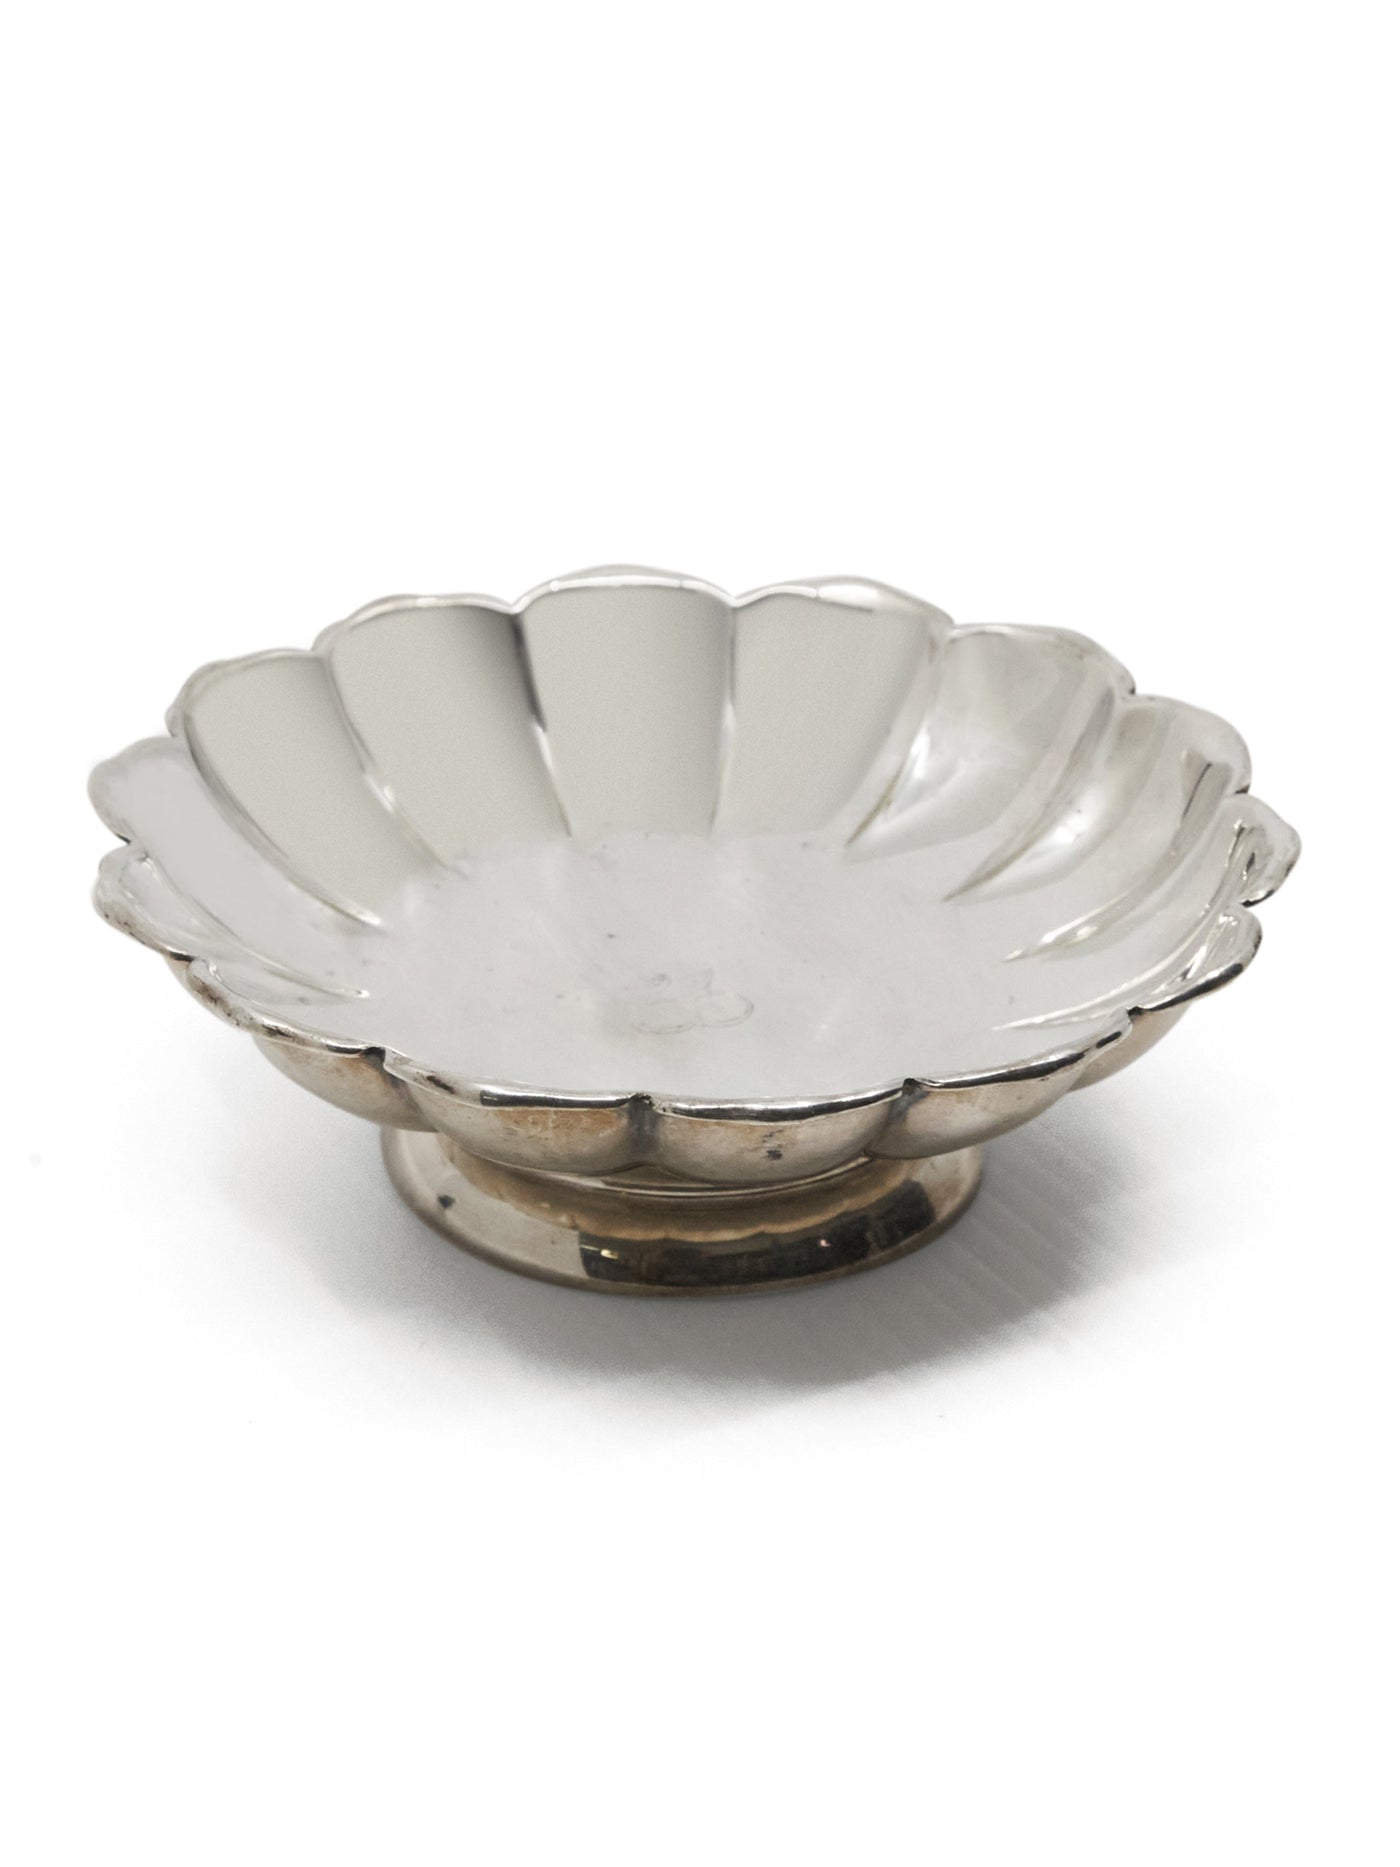 Vintage French Small Silver Scalloped Dish